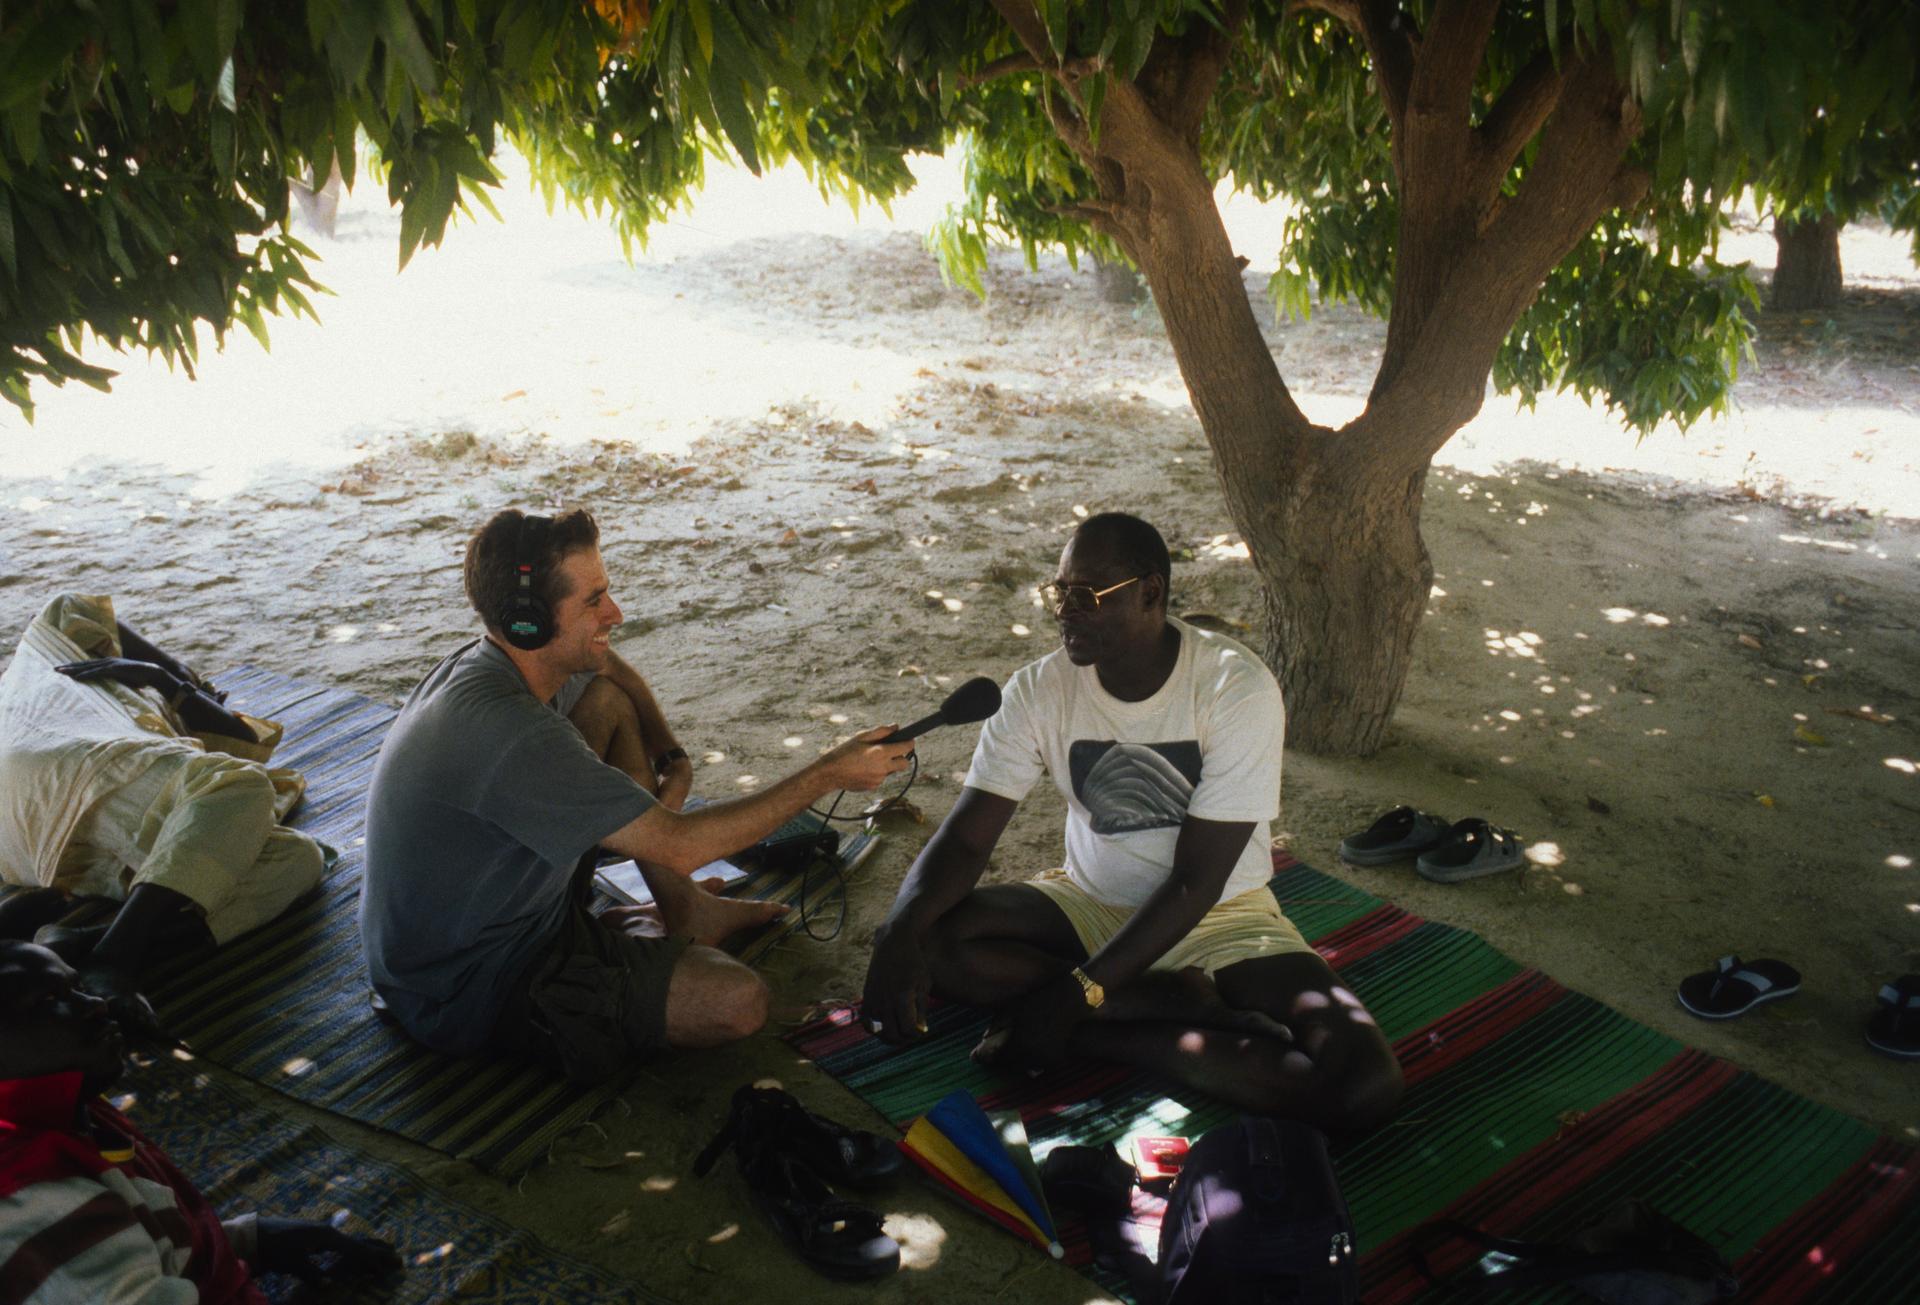 Marco Werman, now host of The World, interviewing singer and musician Ali Farka Toure in Mali in 2000